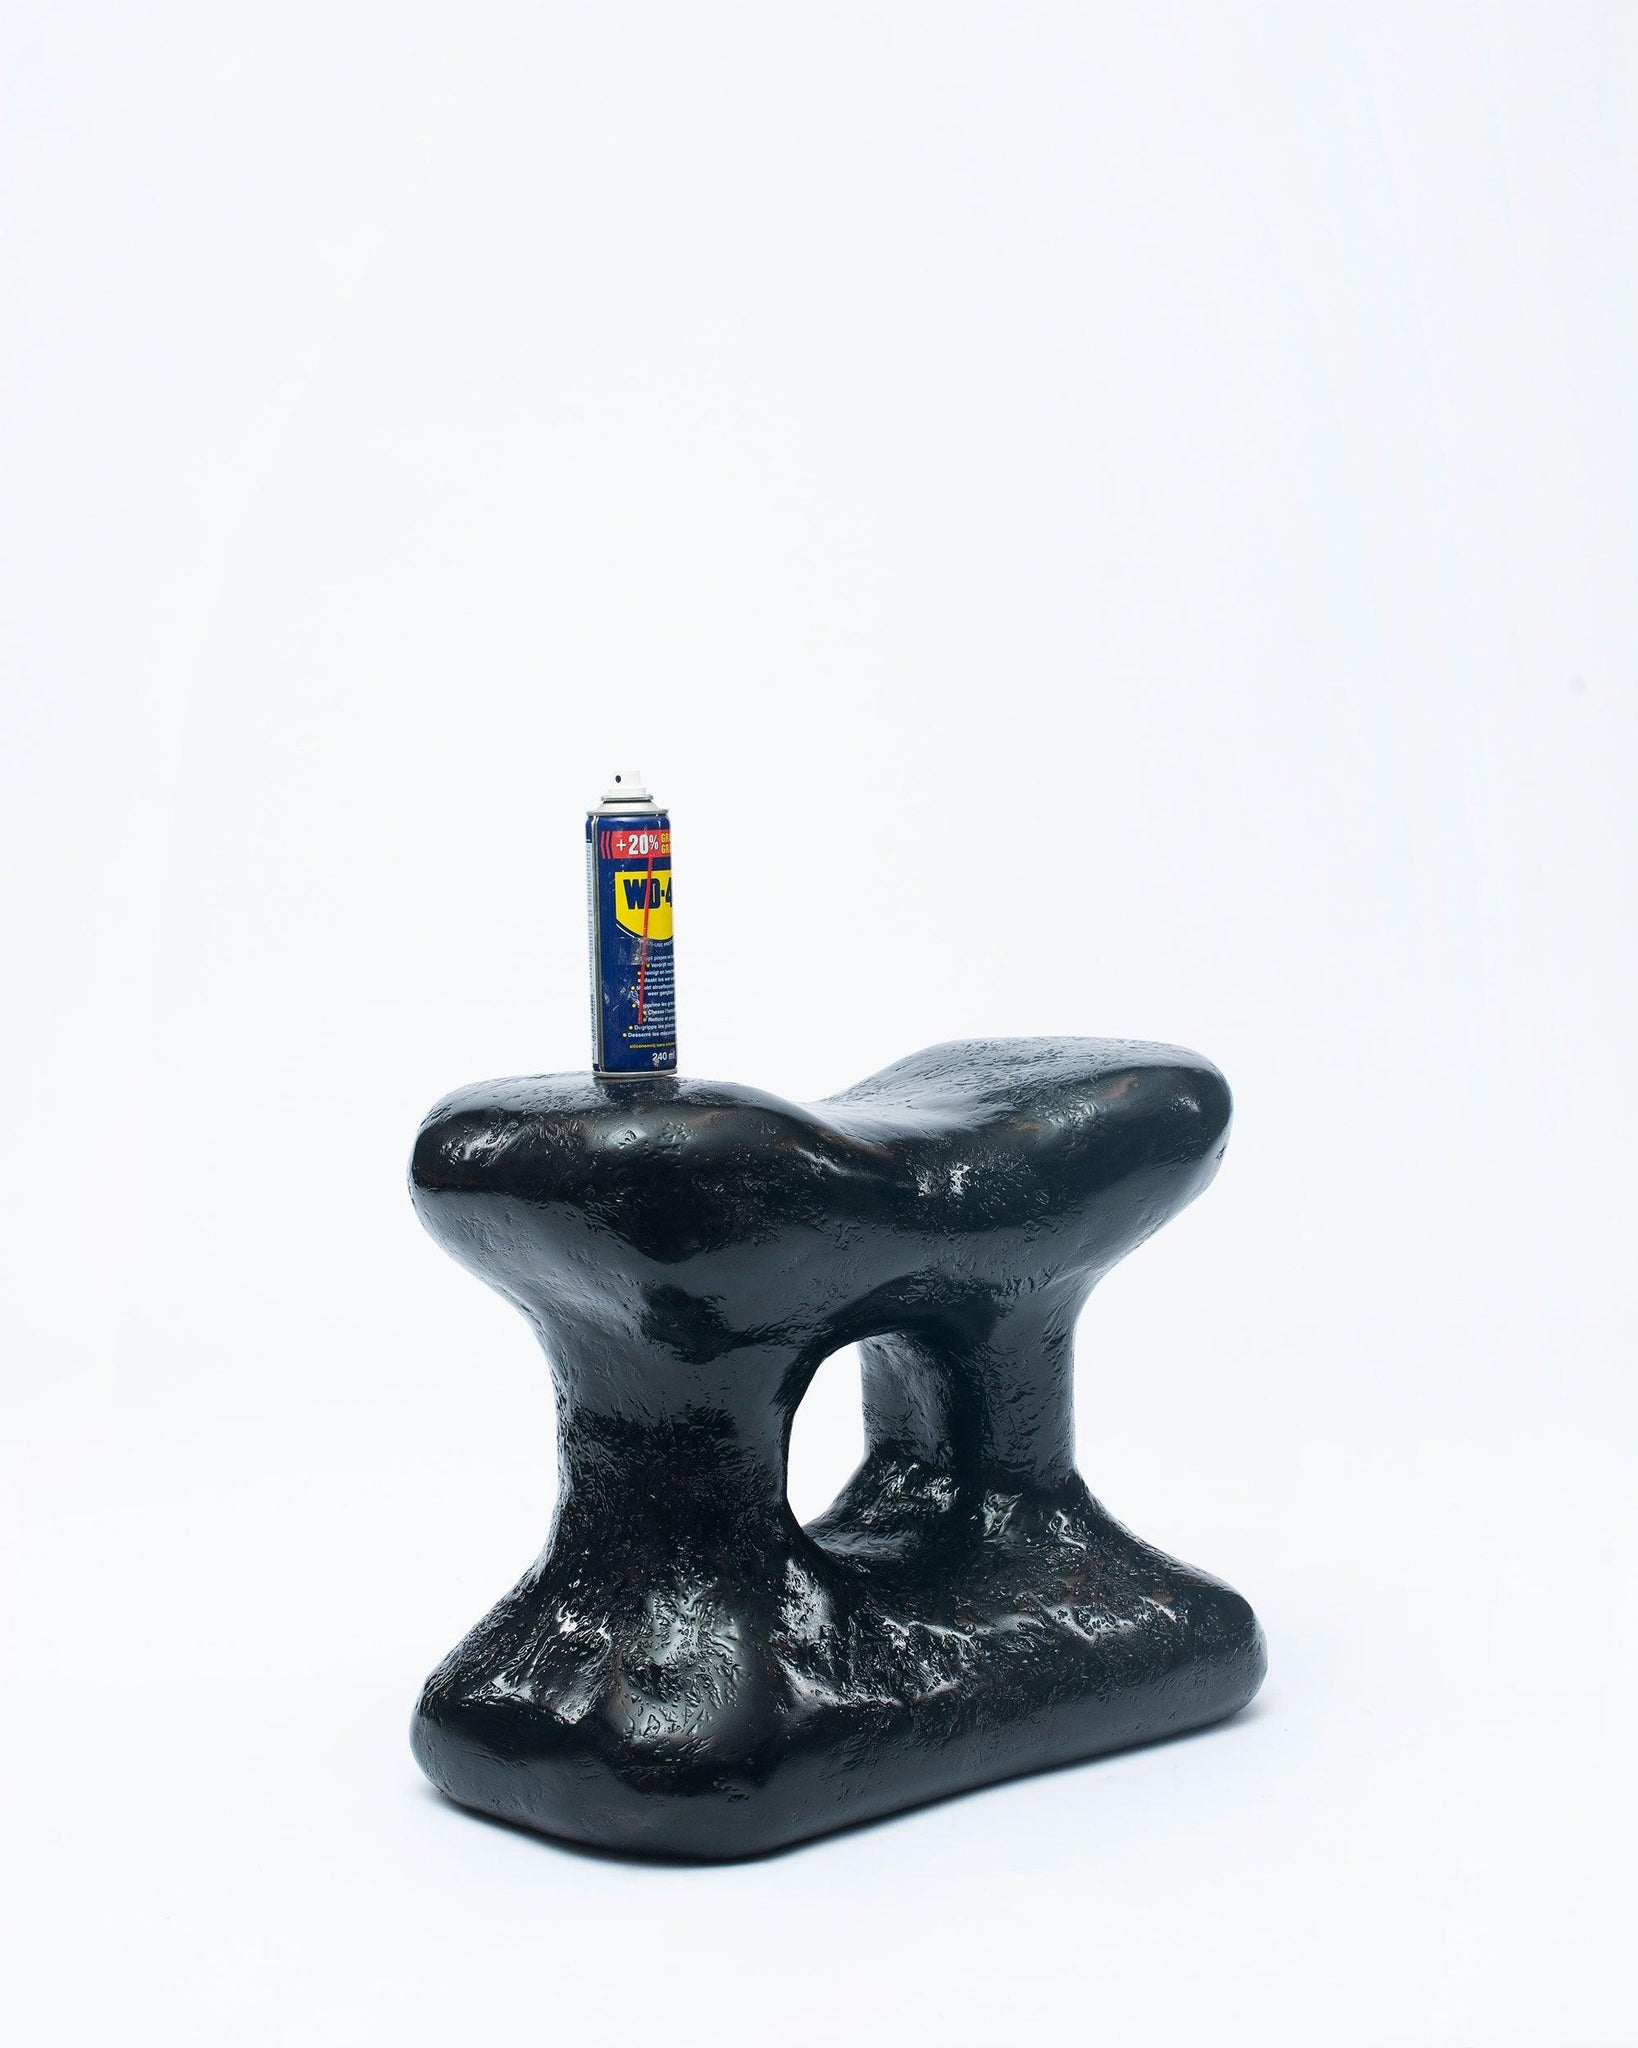 Hand-carved collectible black stool by NIKO JUNE left leaning with sprayed in a corner in white background